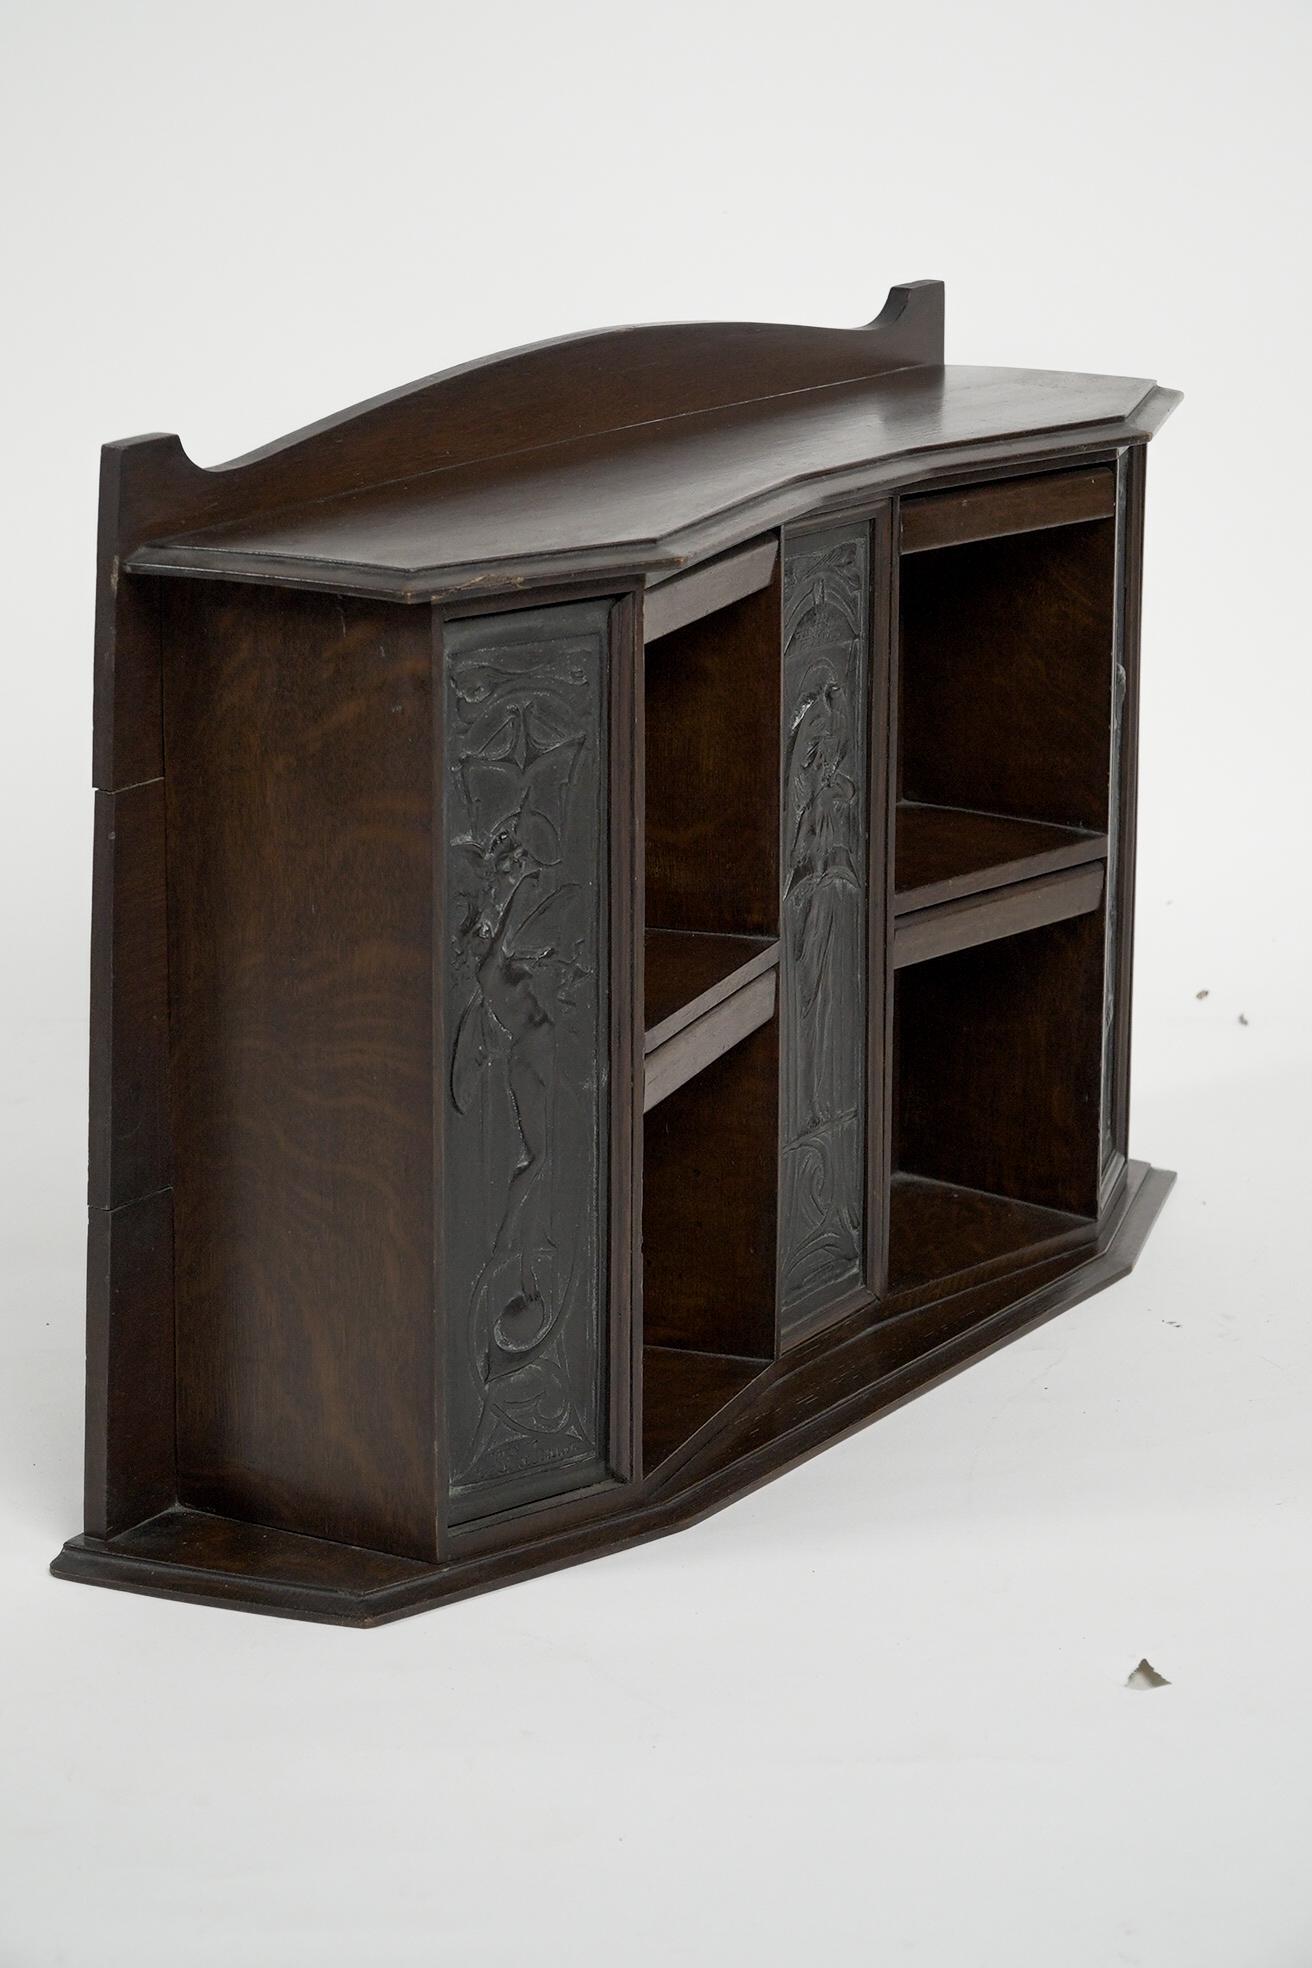 An Arts and Crafts desktop oak bookcase with a shaped upper back and hinged dust flaps to the tops, with three bronze plaques. 
The left plaque depicts an angel with a quote at her feet: Born to speak all mirth. 
The centre plaque with an angel, and